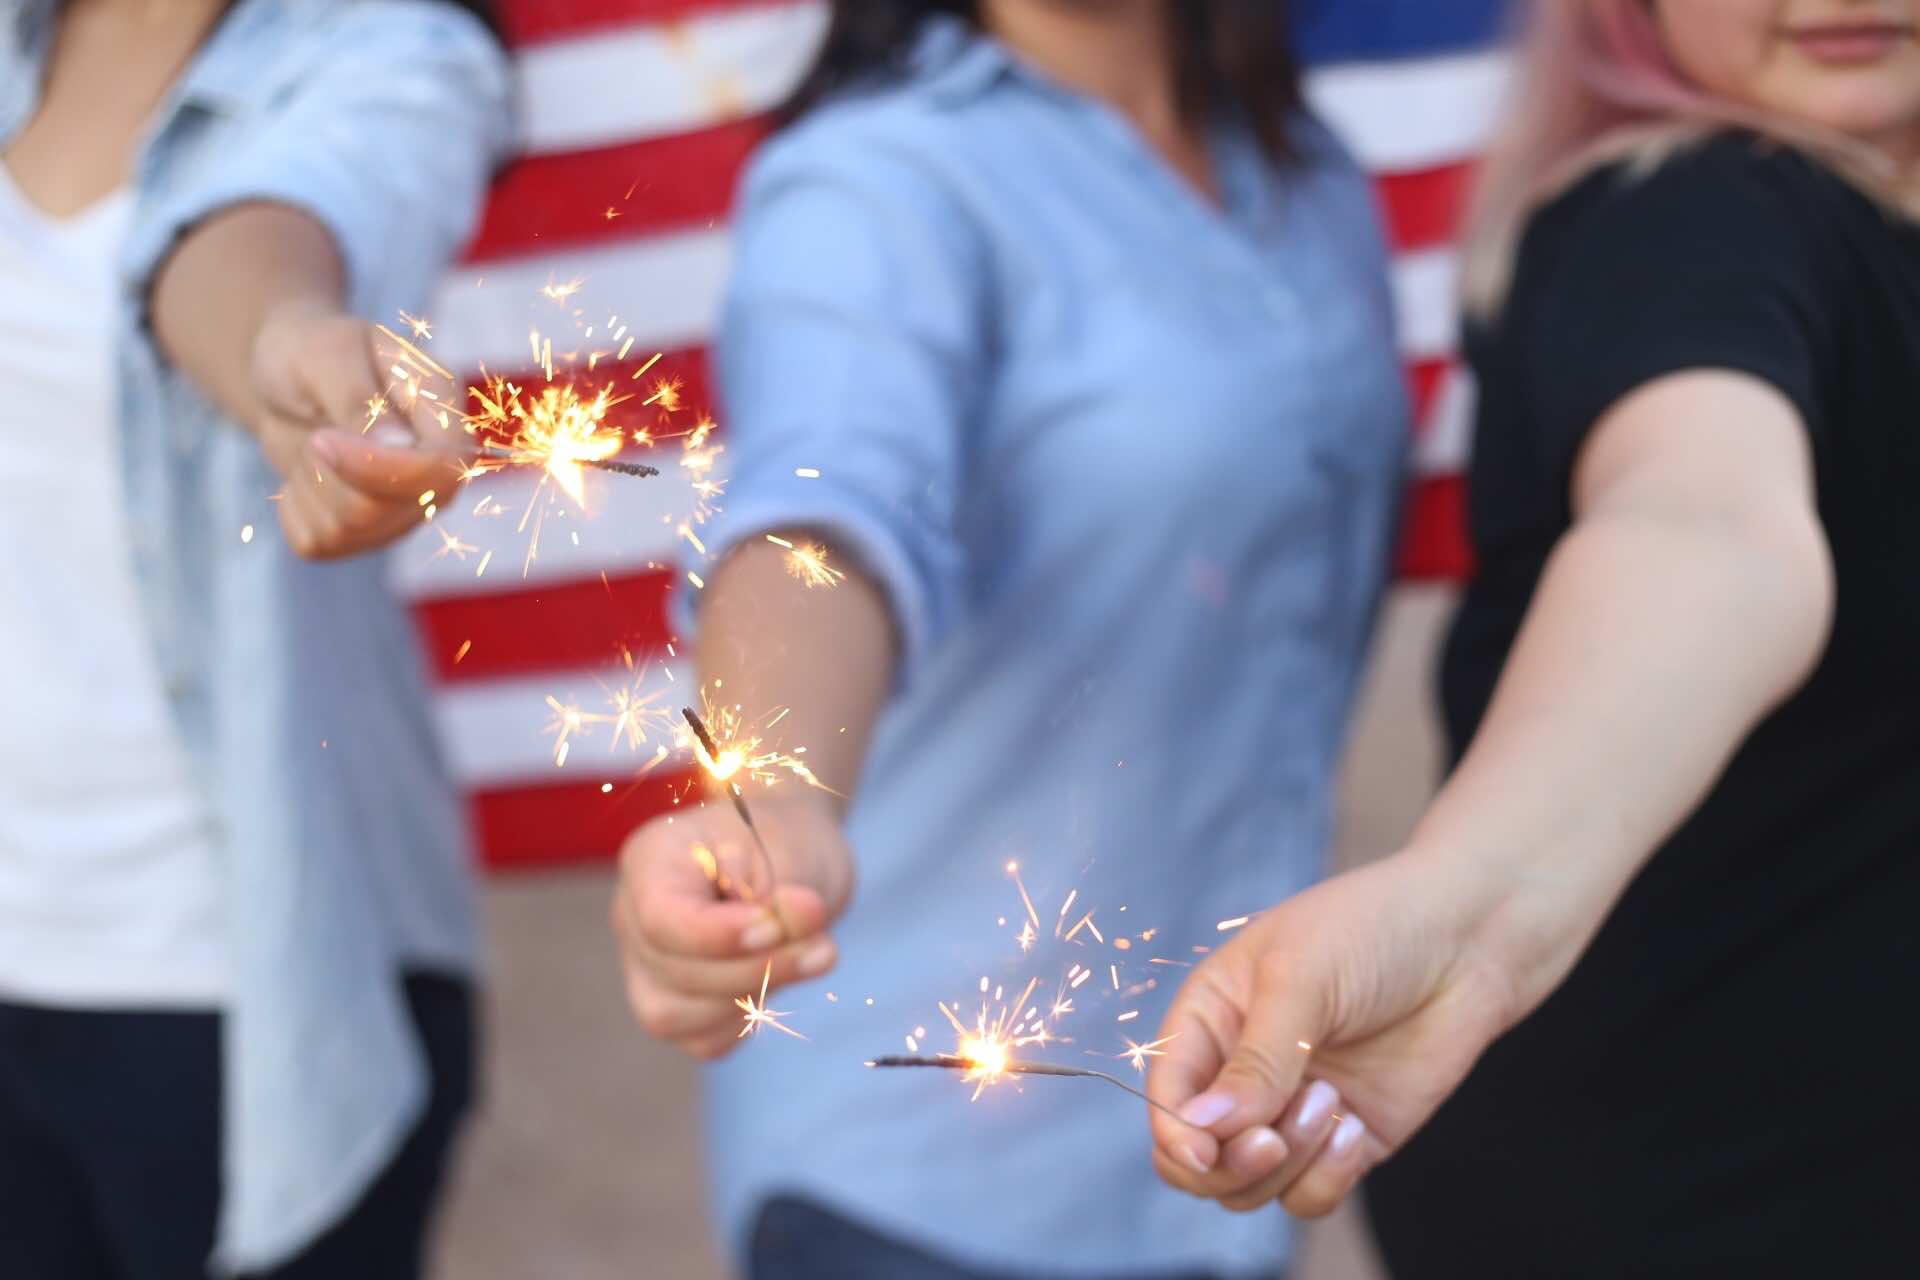 Friends enjoying cannabis and fireworks at 4th of July party